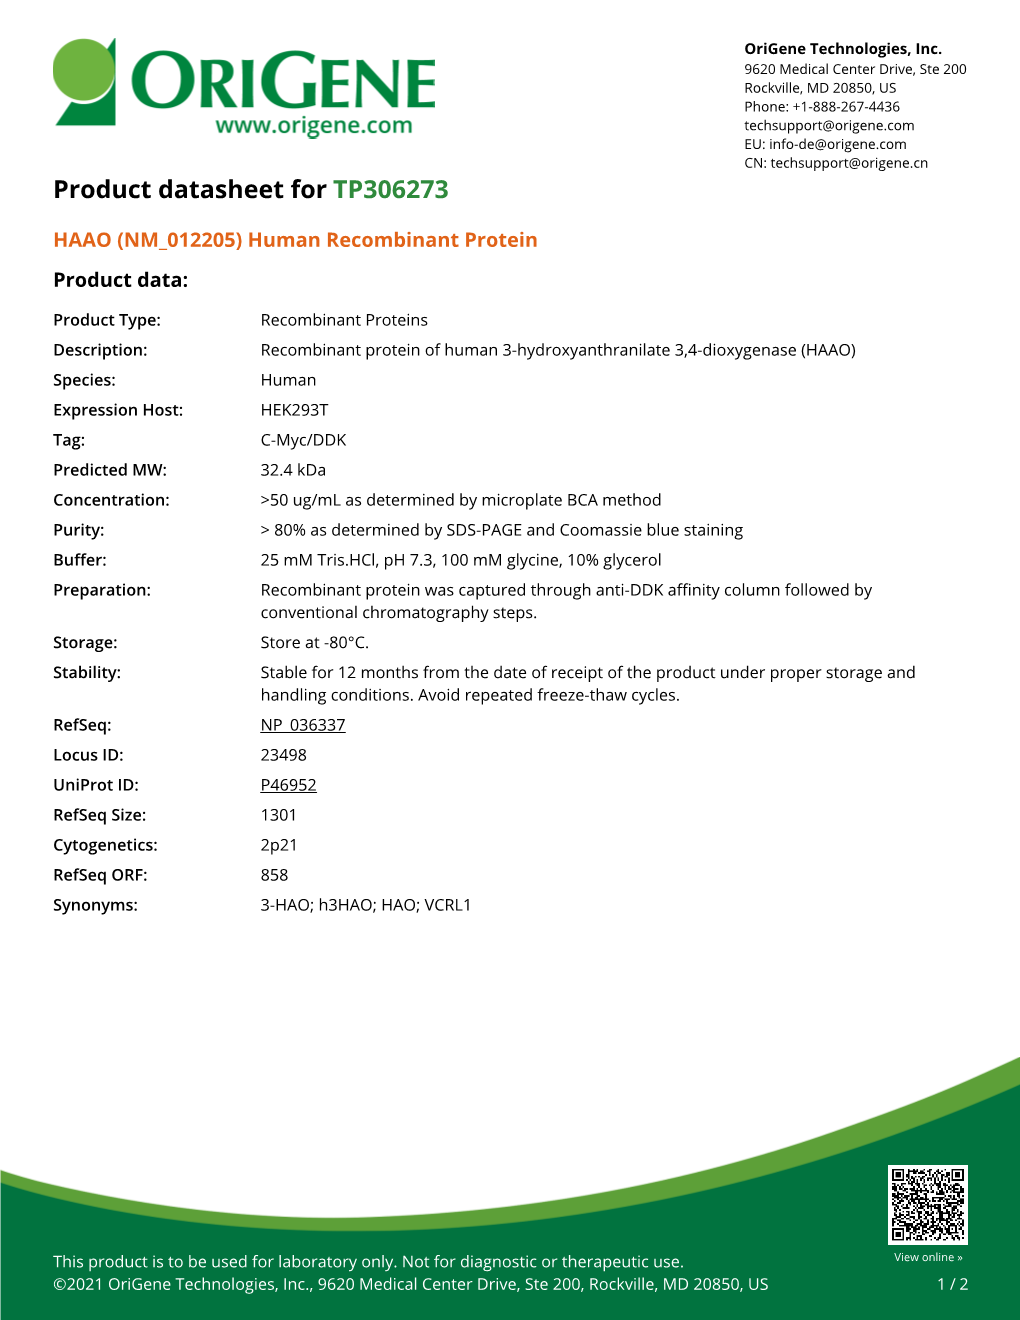 HAAO (NM 012205) Human Recombinant Protein Product Data